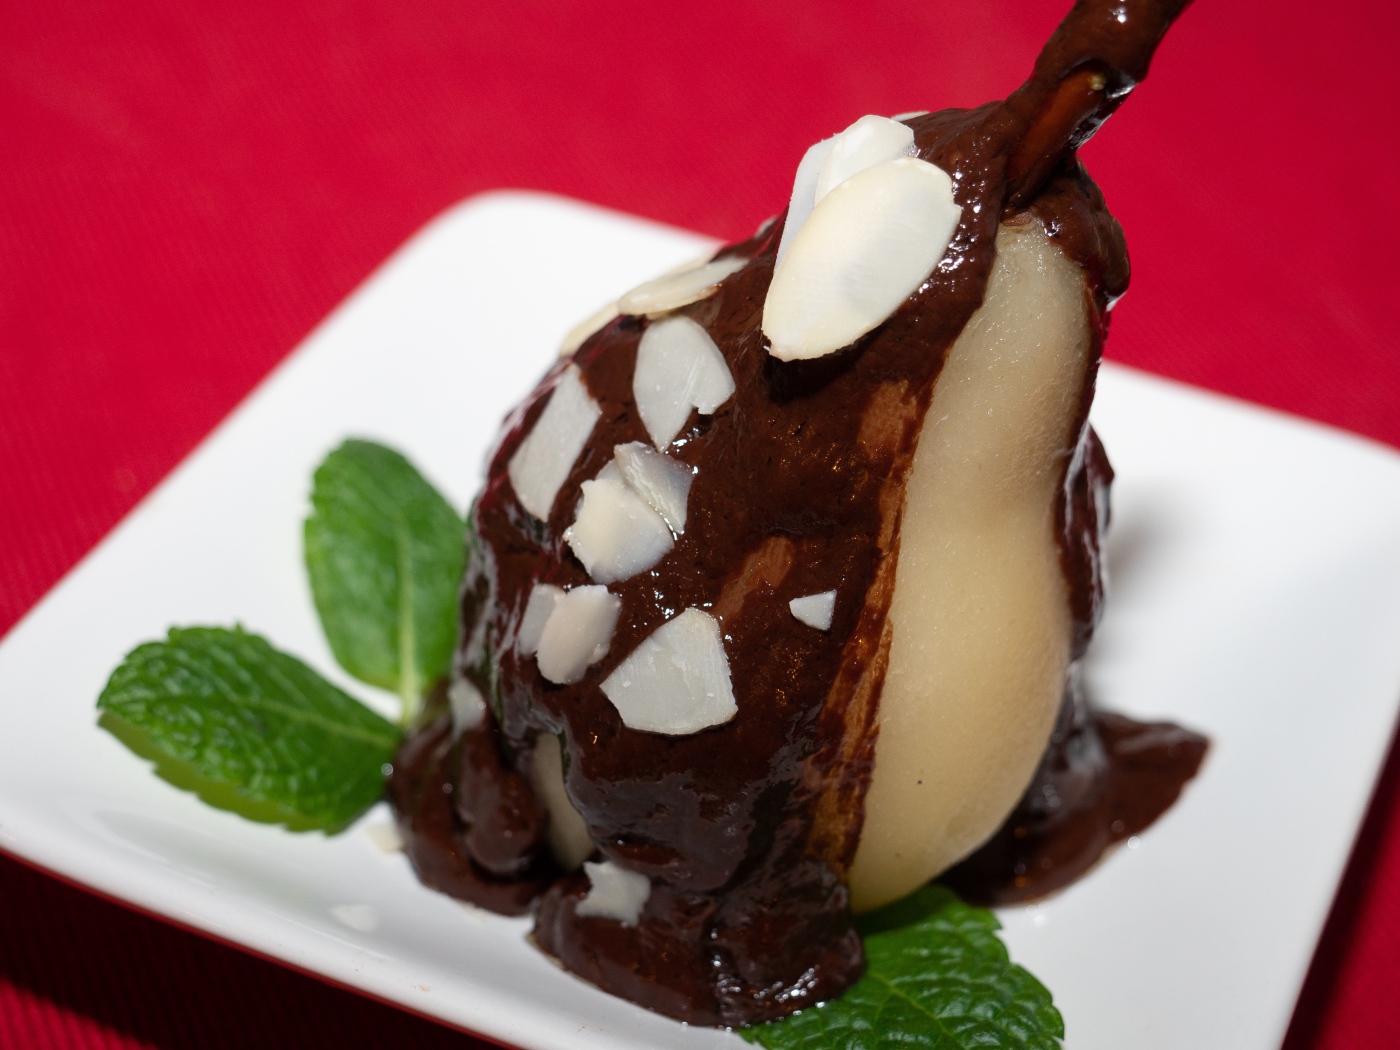 Pear on a white plate with chocolate on a red background